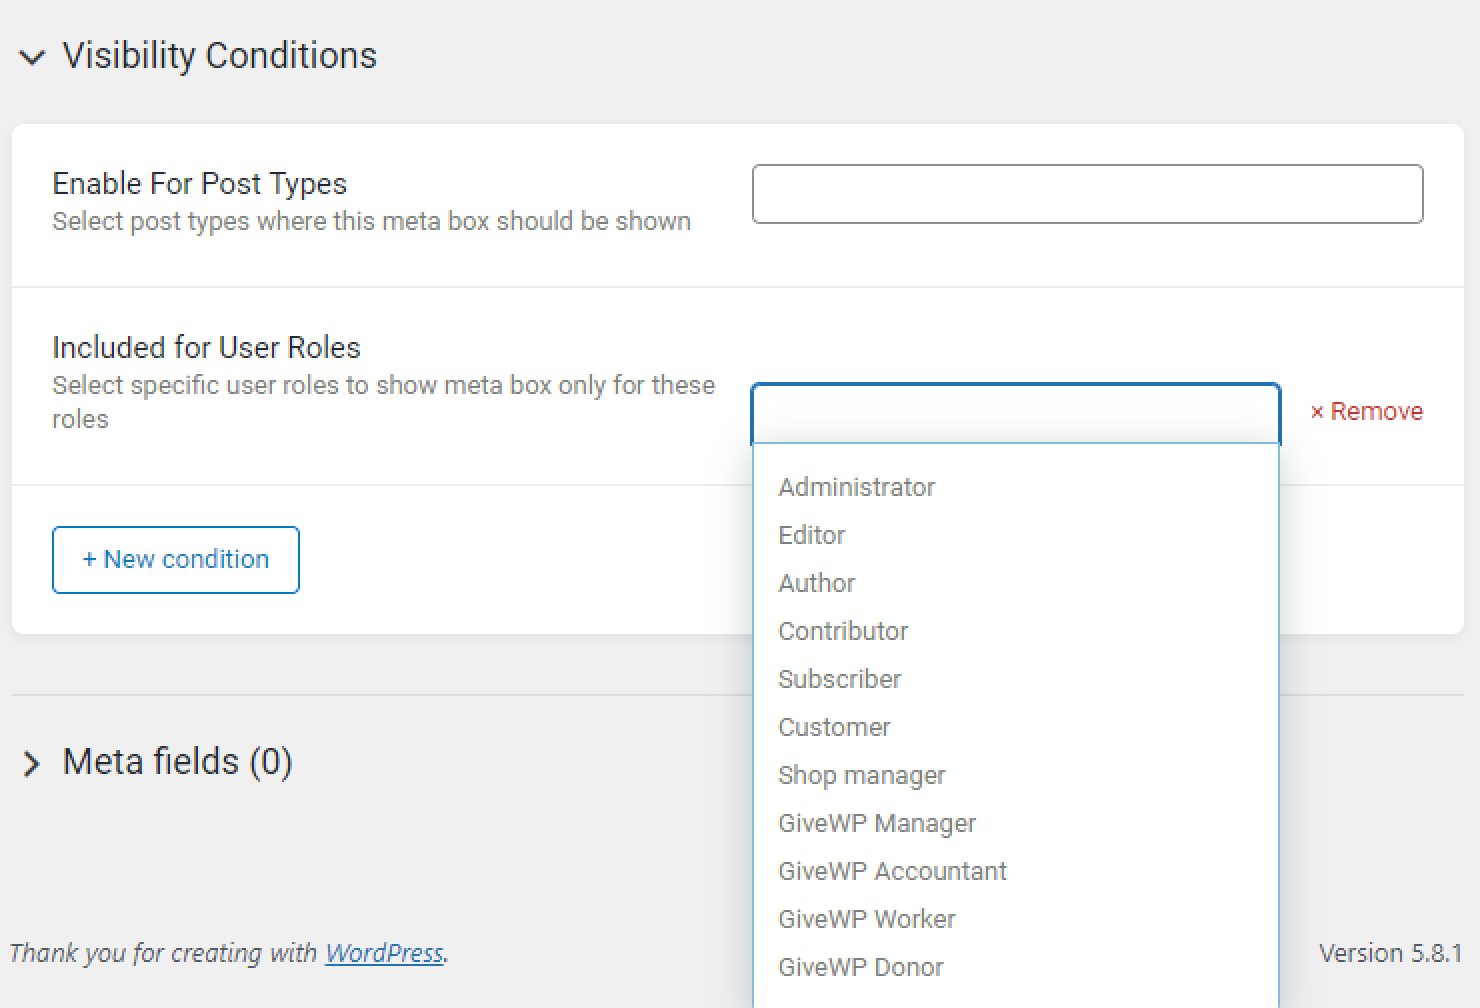 included for user roles condition